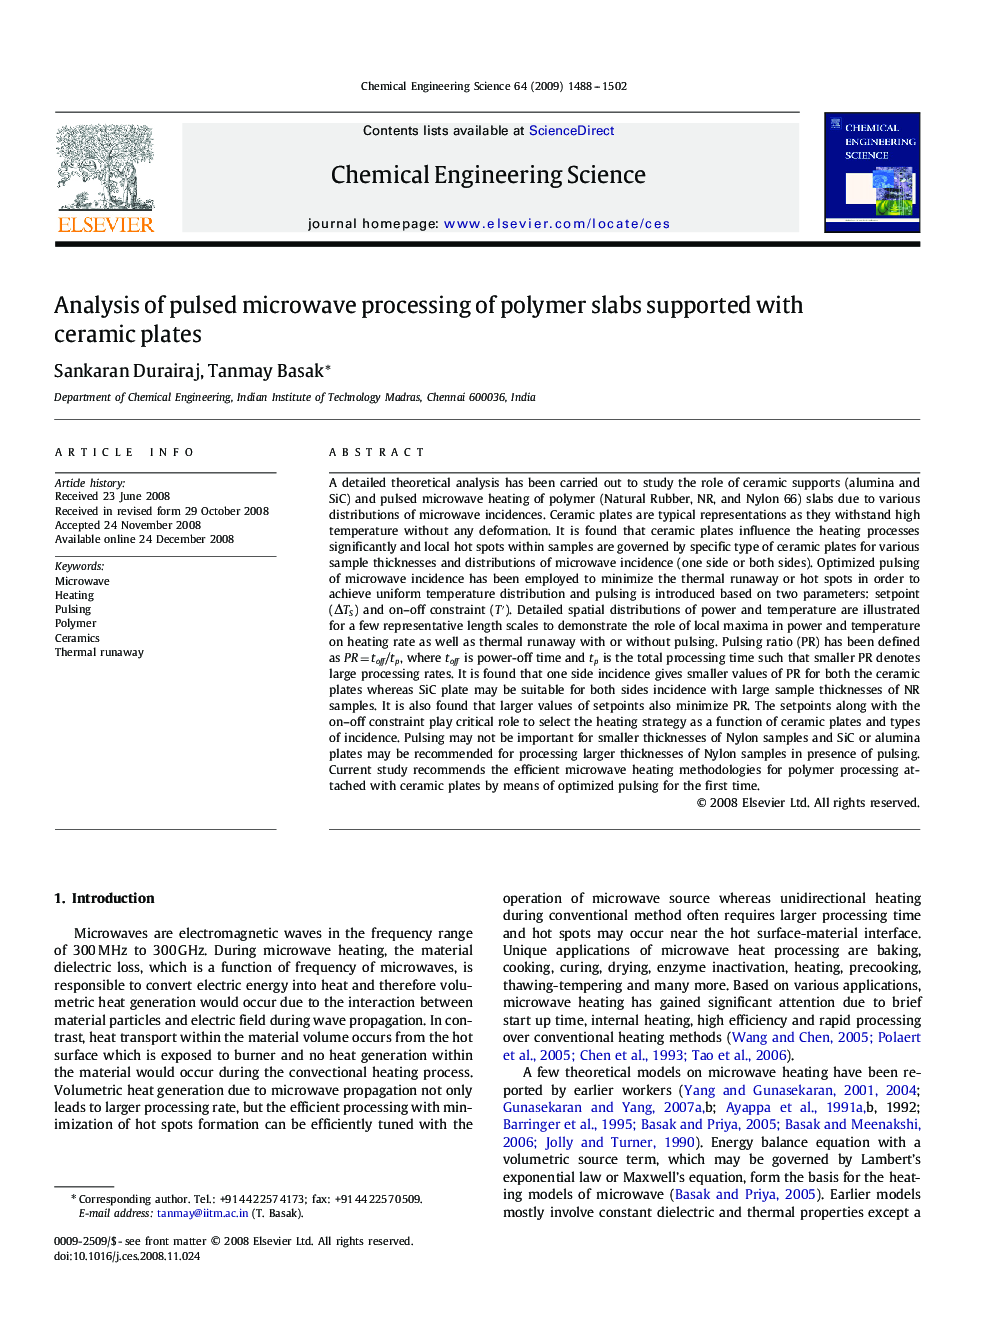 Analysis of pulsed microwave processing of polymer slabs supported with ceramic plates